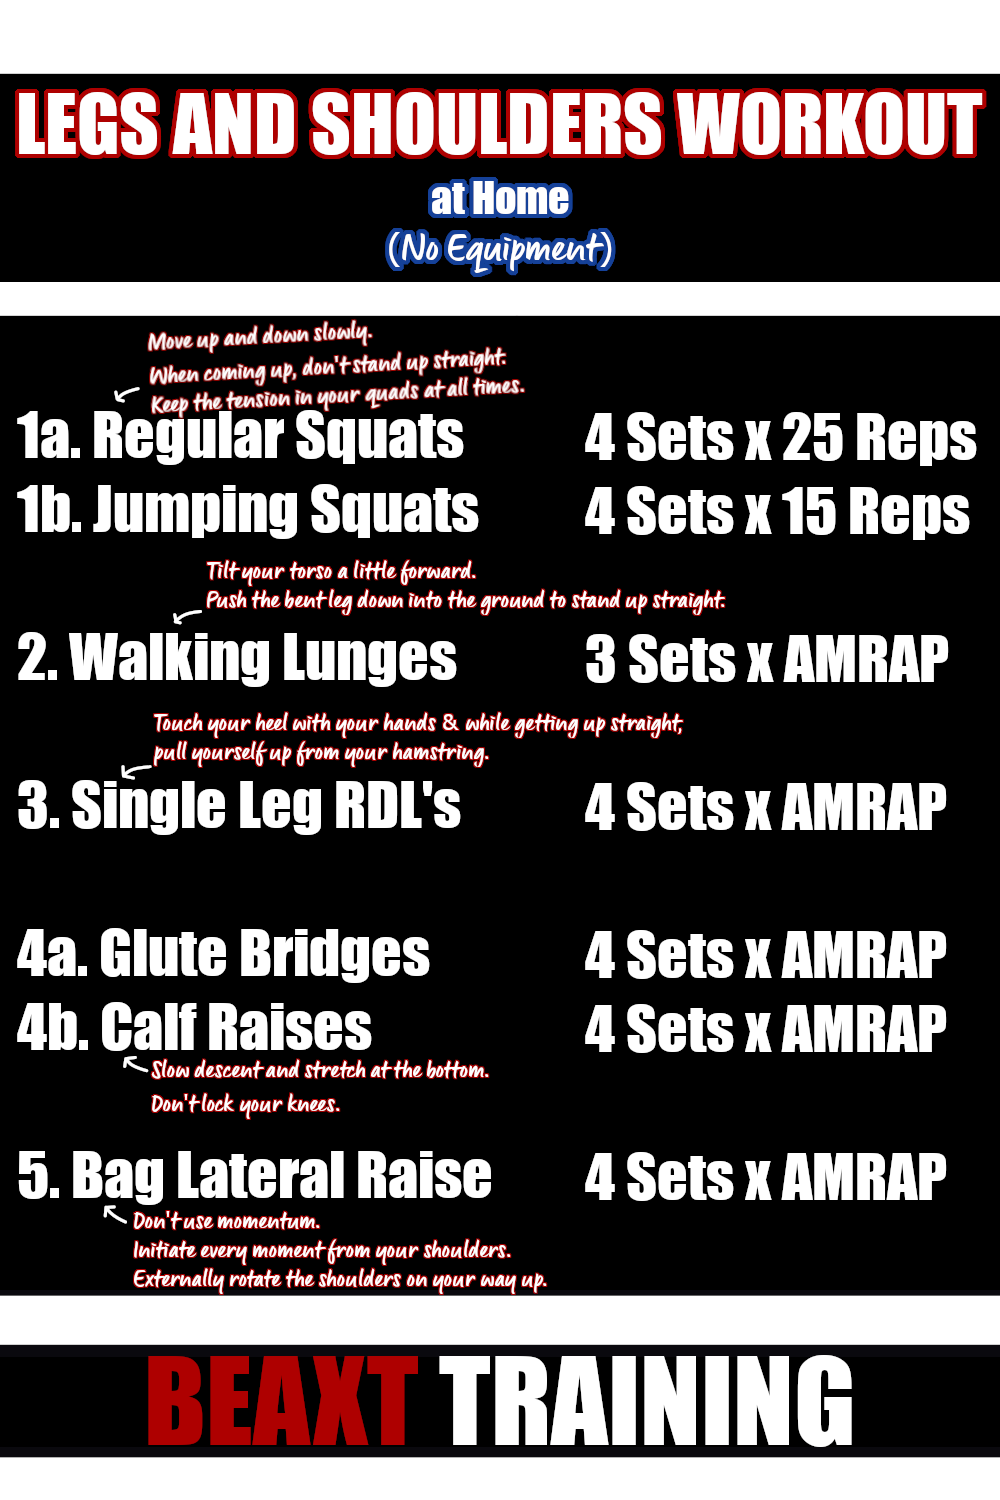 Legs and Shoulders workout at home without equipment